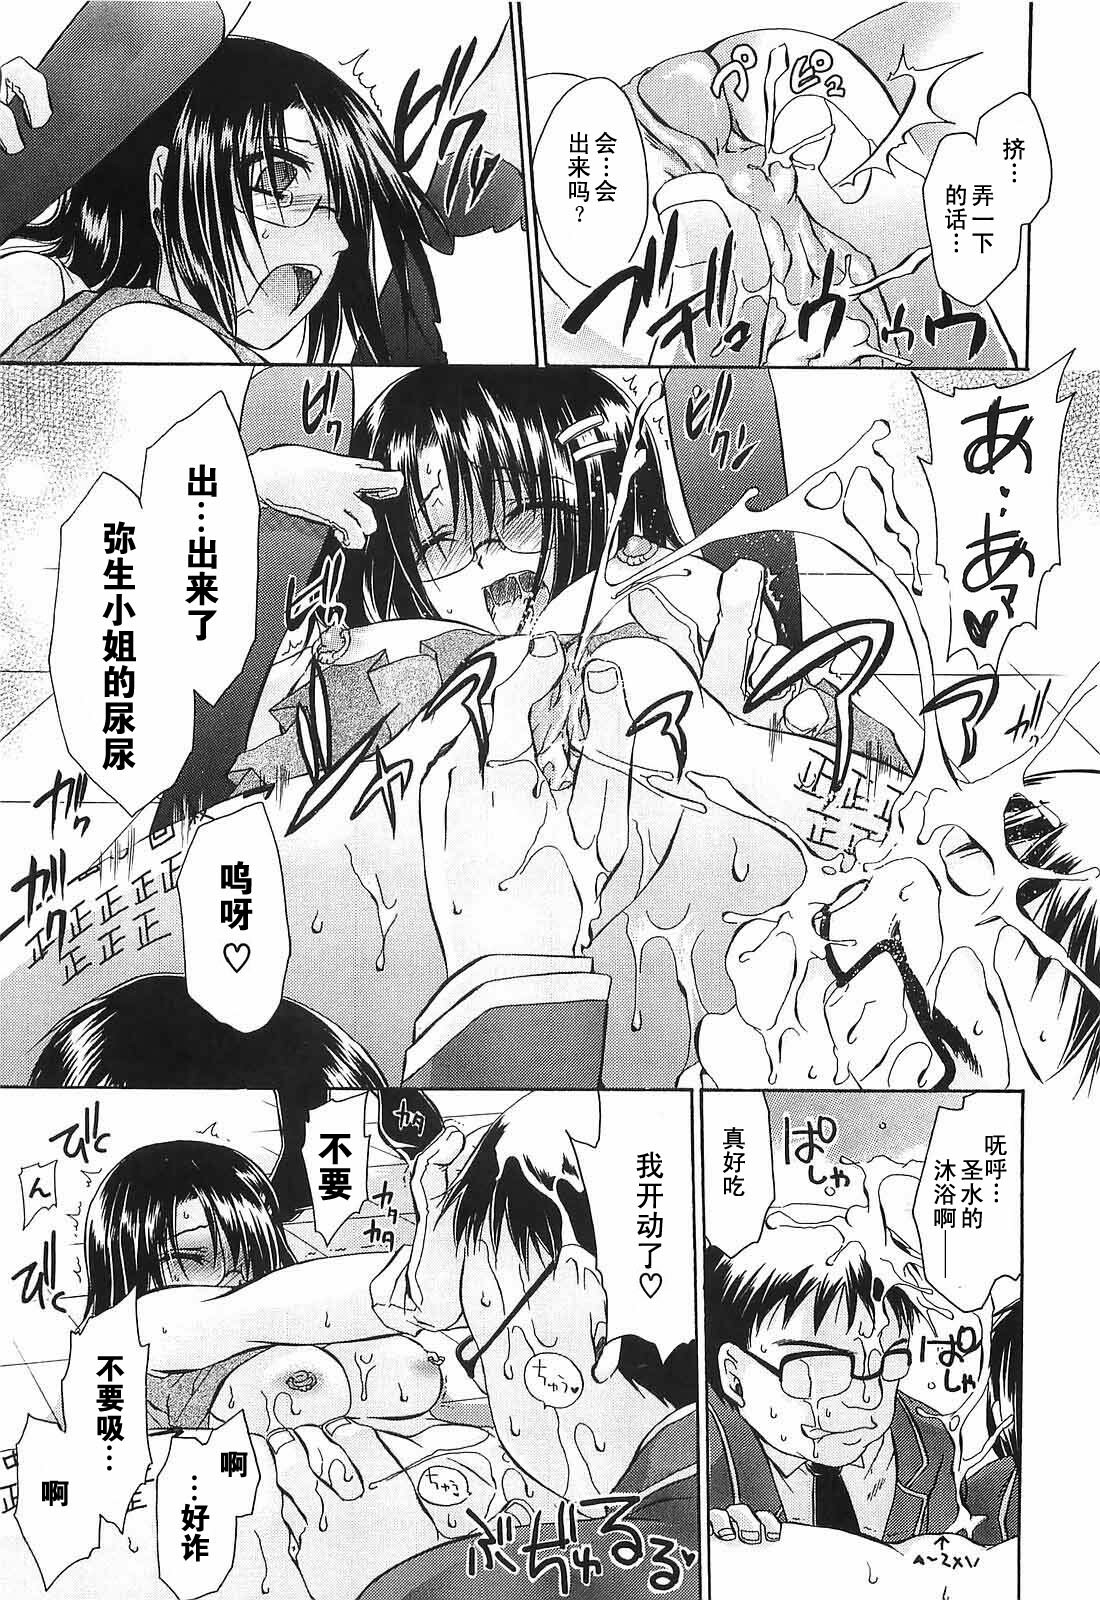 [Shinonome Ryu] LOVE&HATE 3 ~ENGAGE~ [Chinese] [52H漢化組] page 23 full